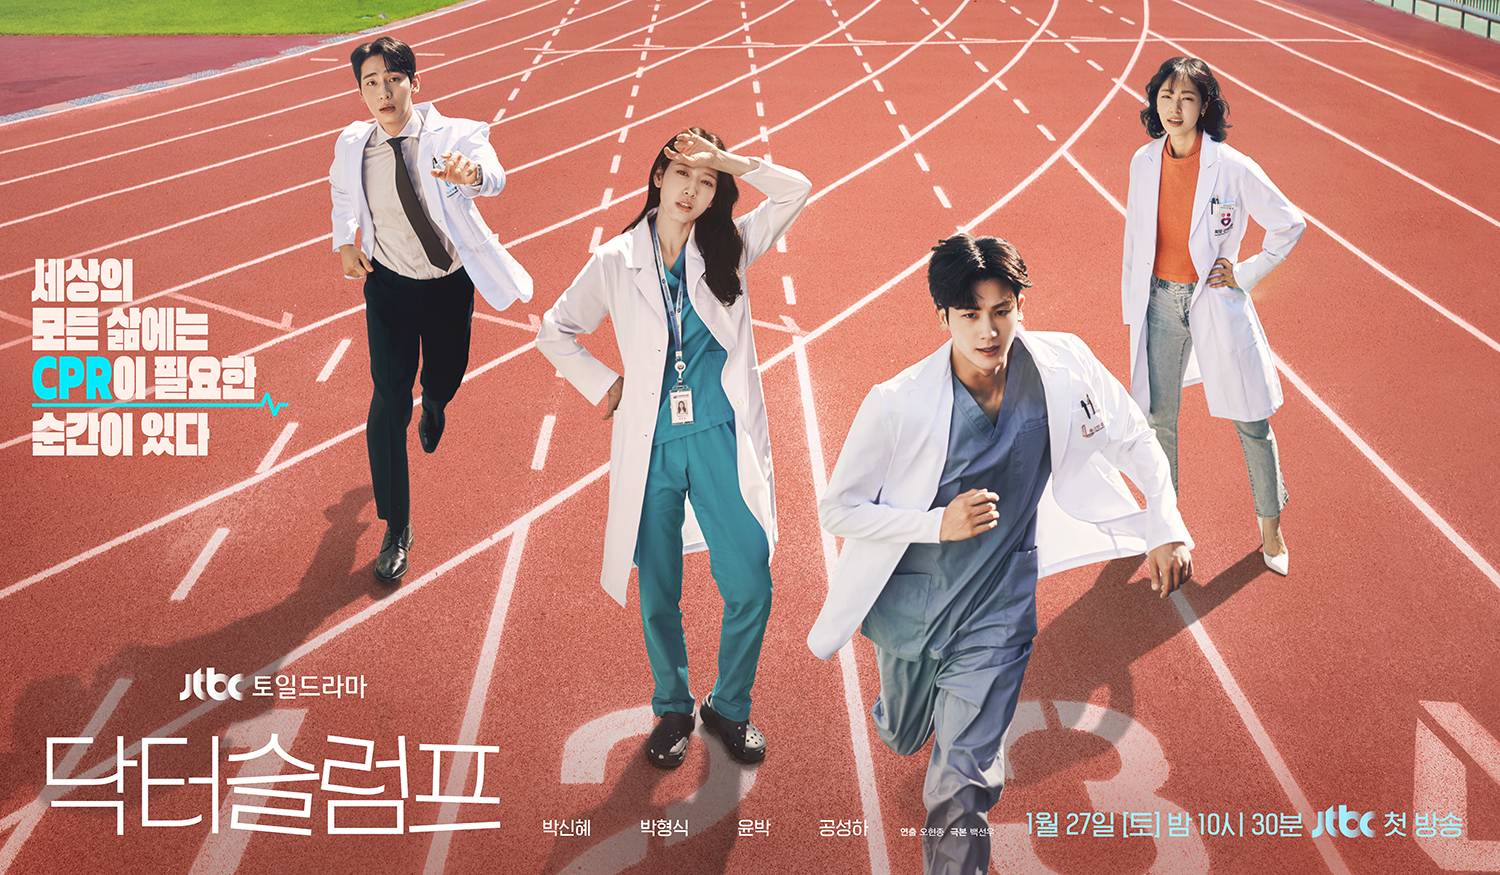 Doctor Slump Release date, episodes, cast, and more about the Kdrama